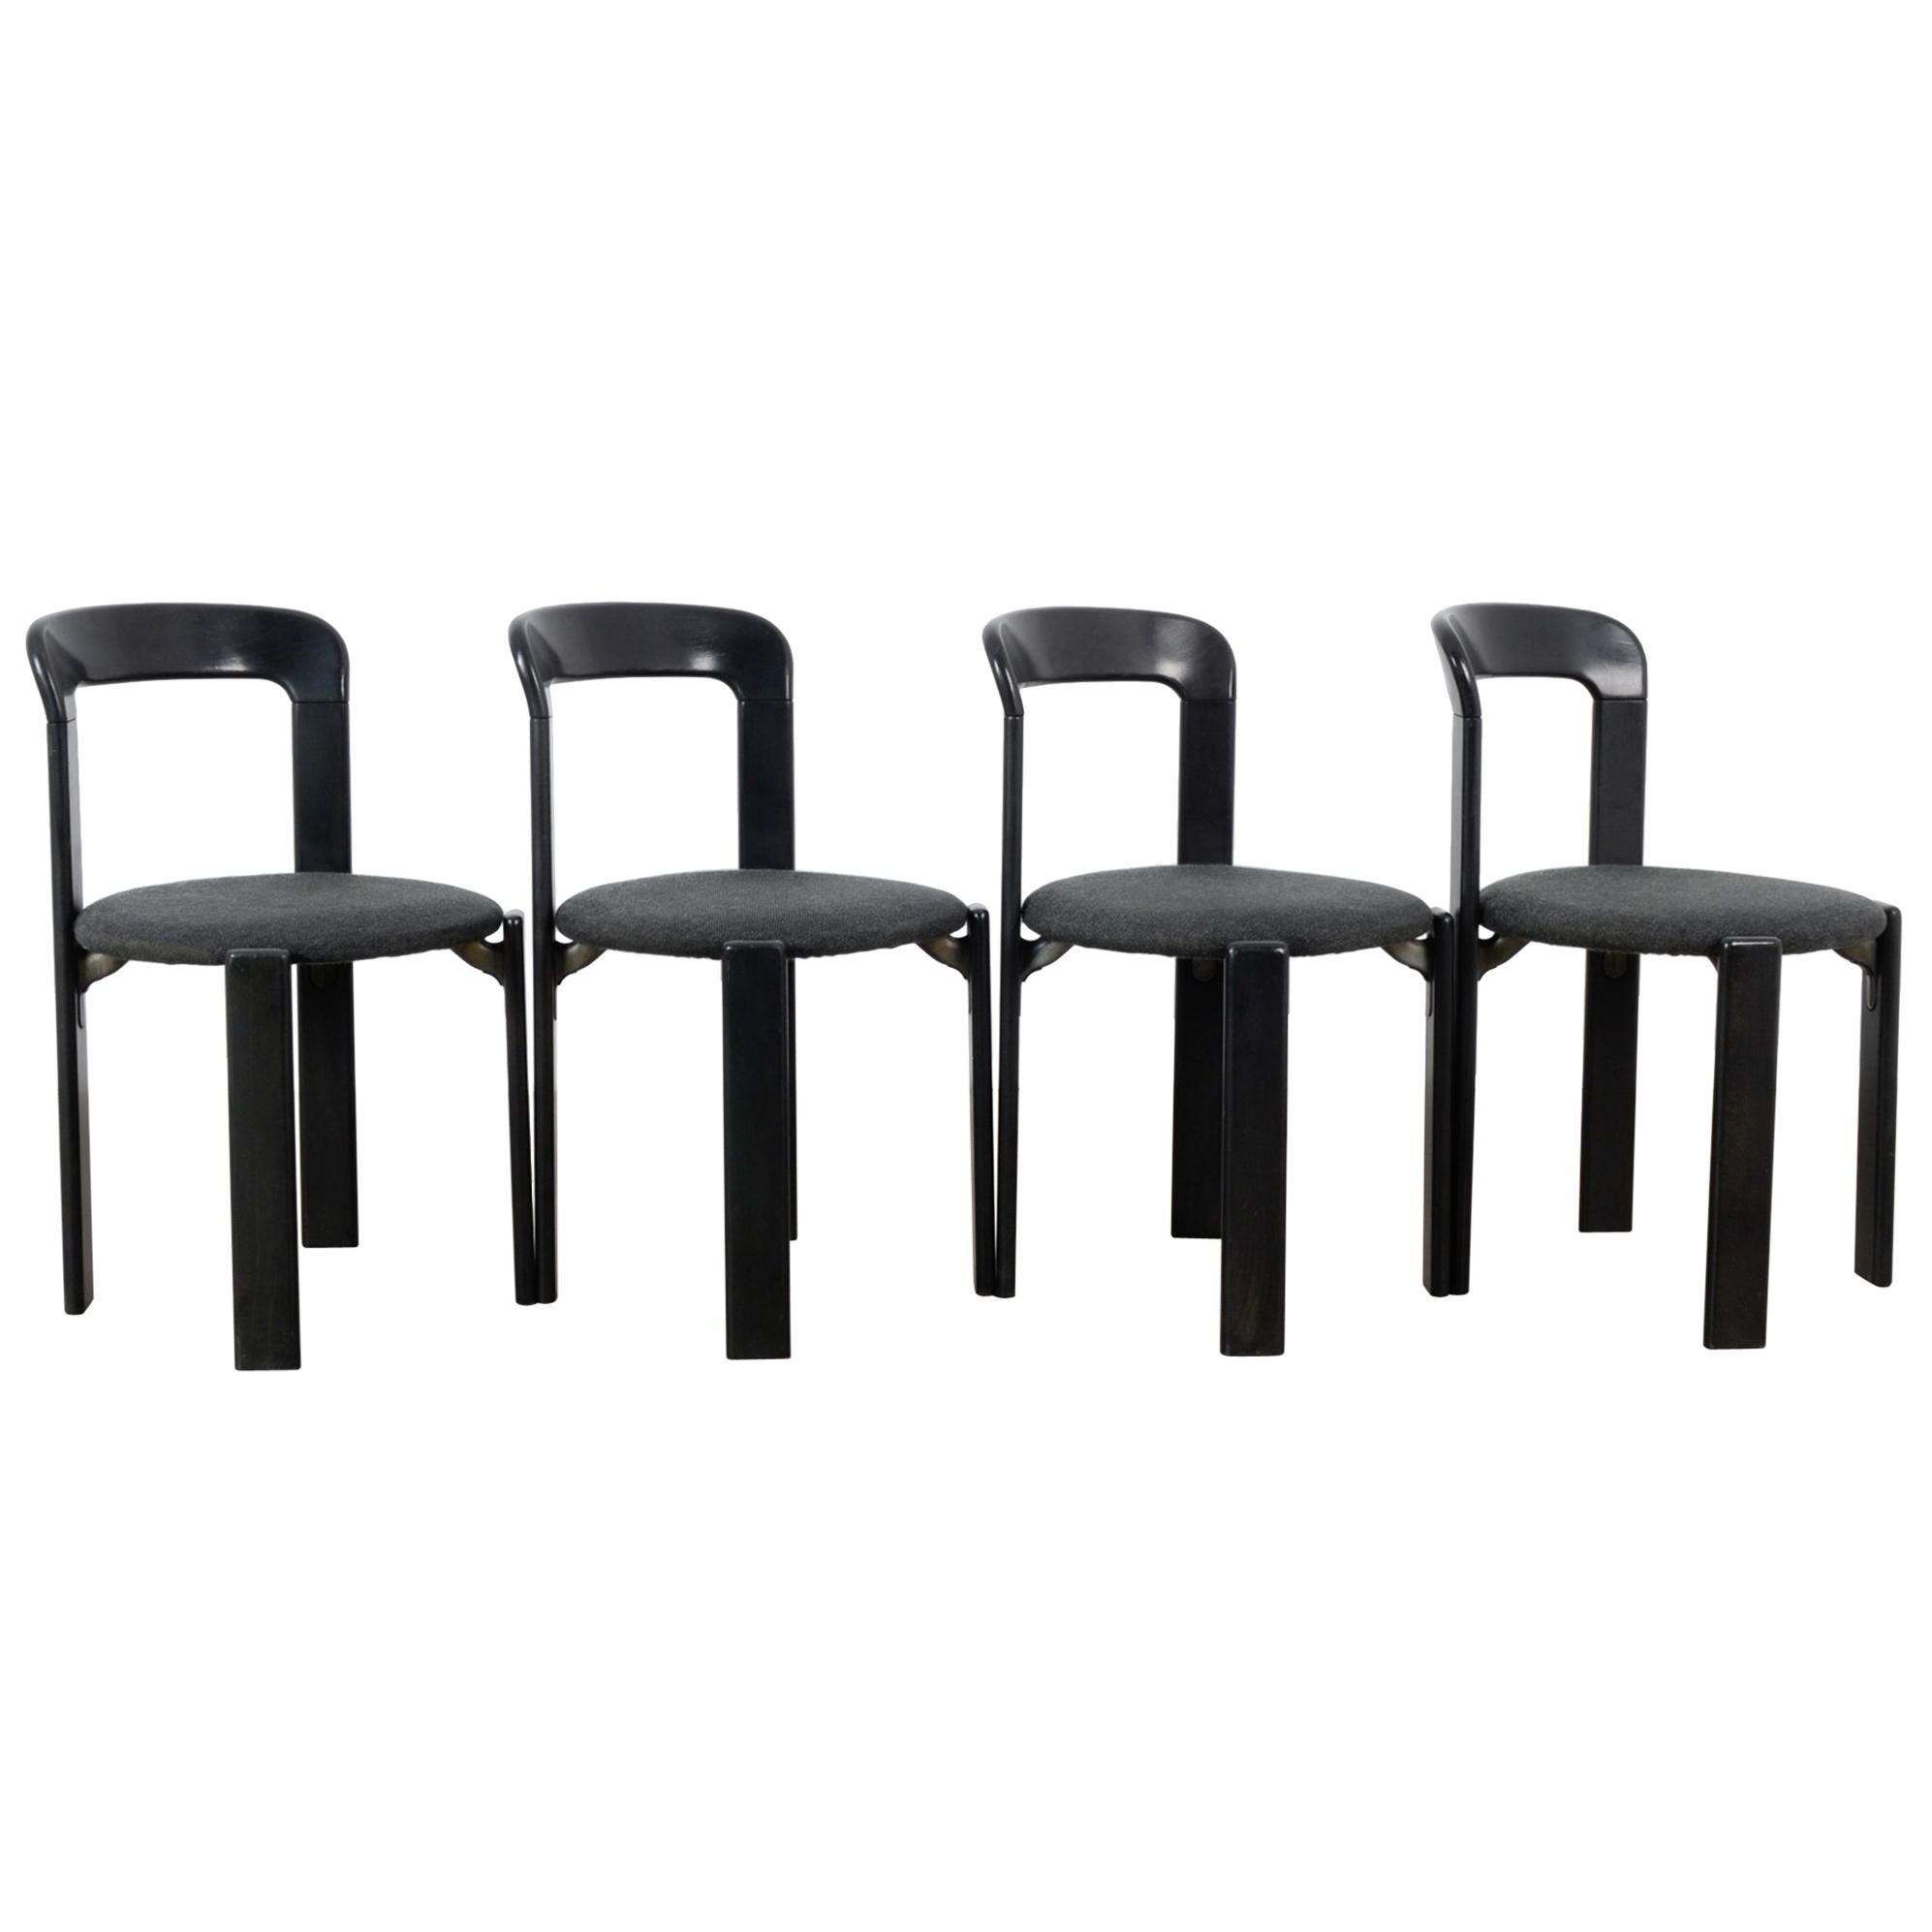 Bruno Rey Upholstered Black Dining Chairs, Set of Four